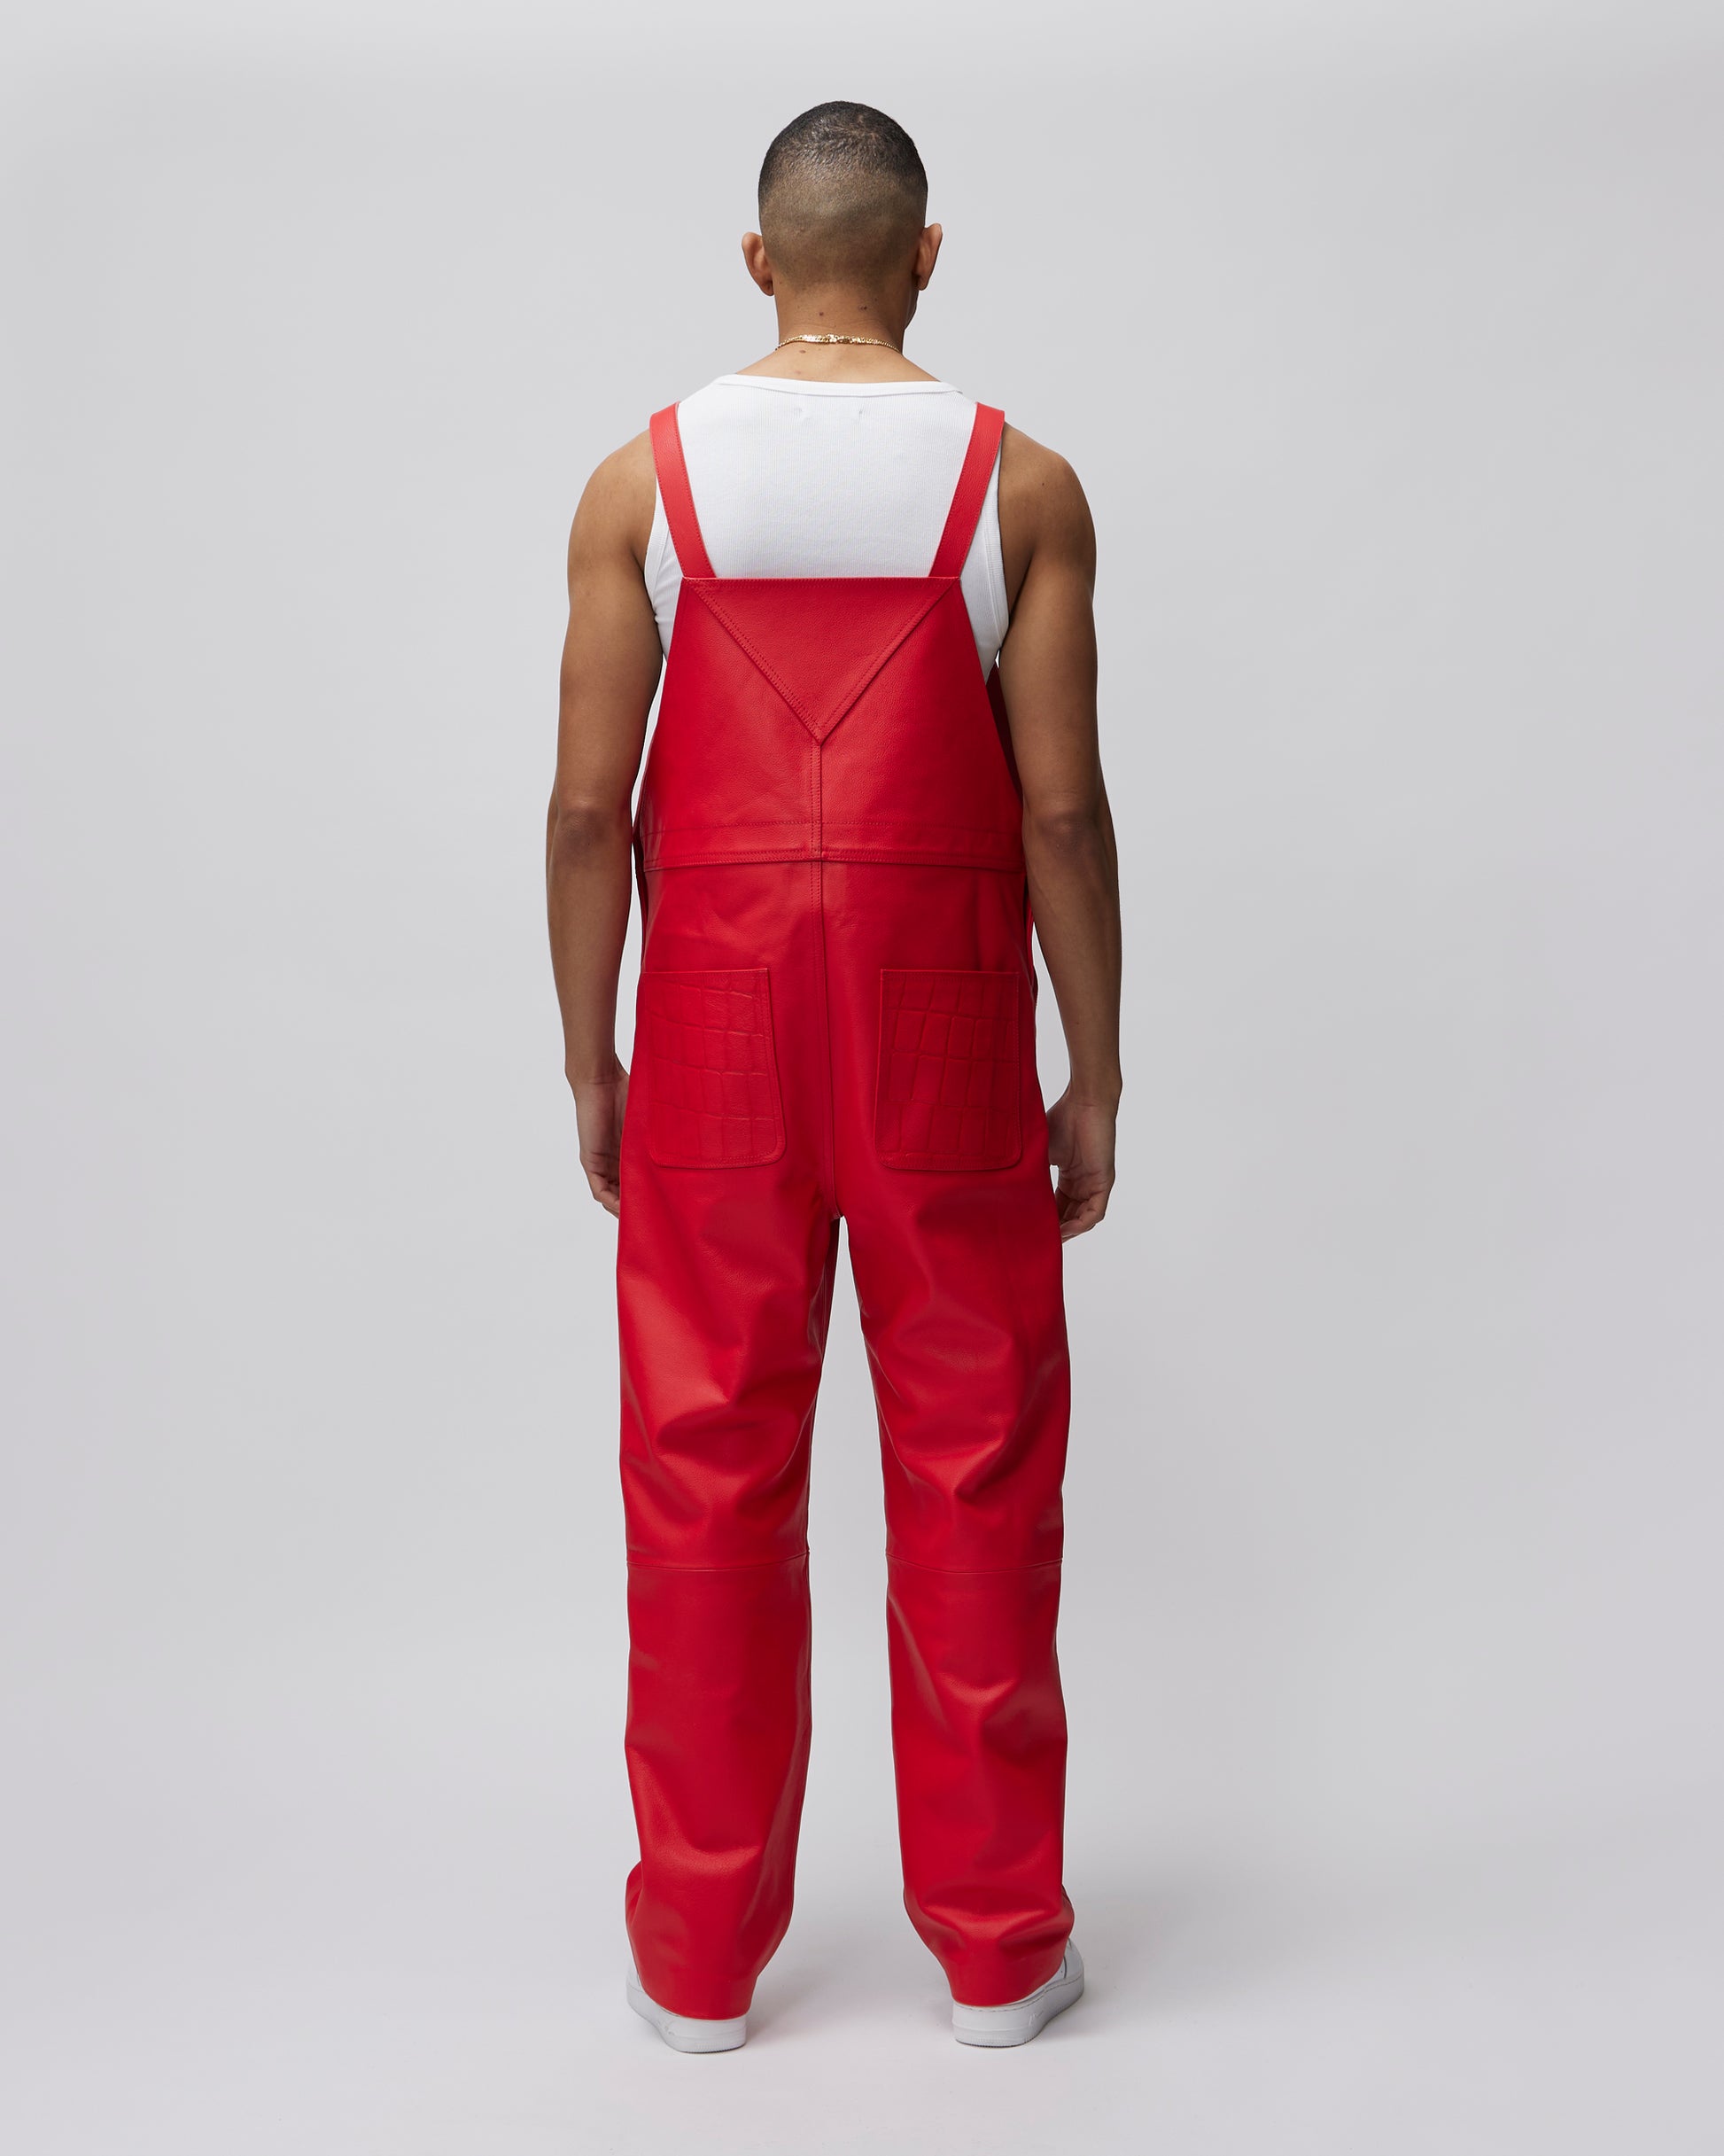 LEATHER DUNGAREE - Due Diligence Apparel